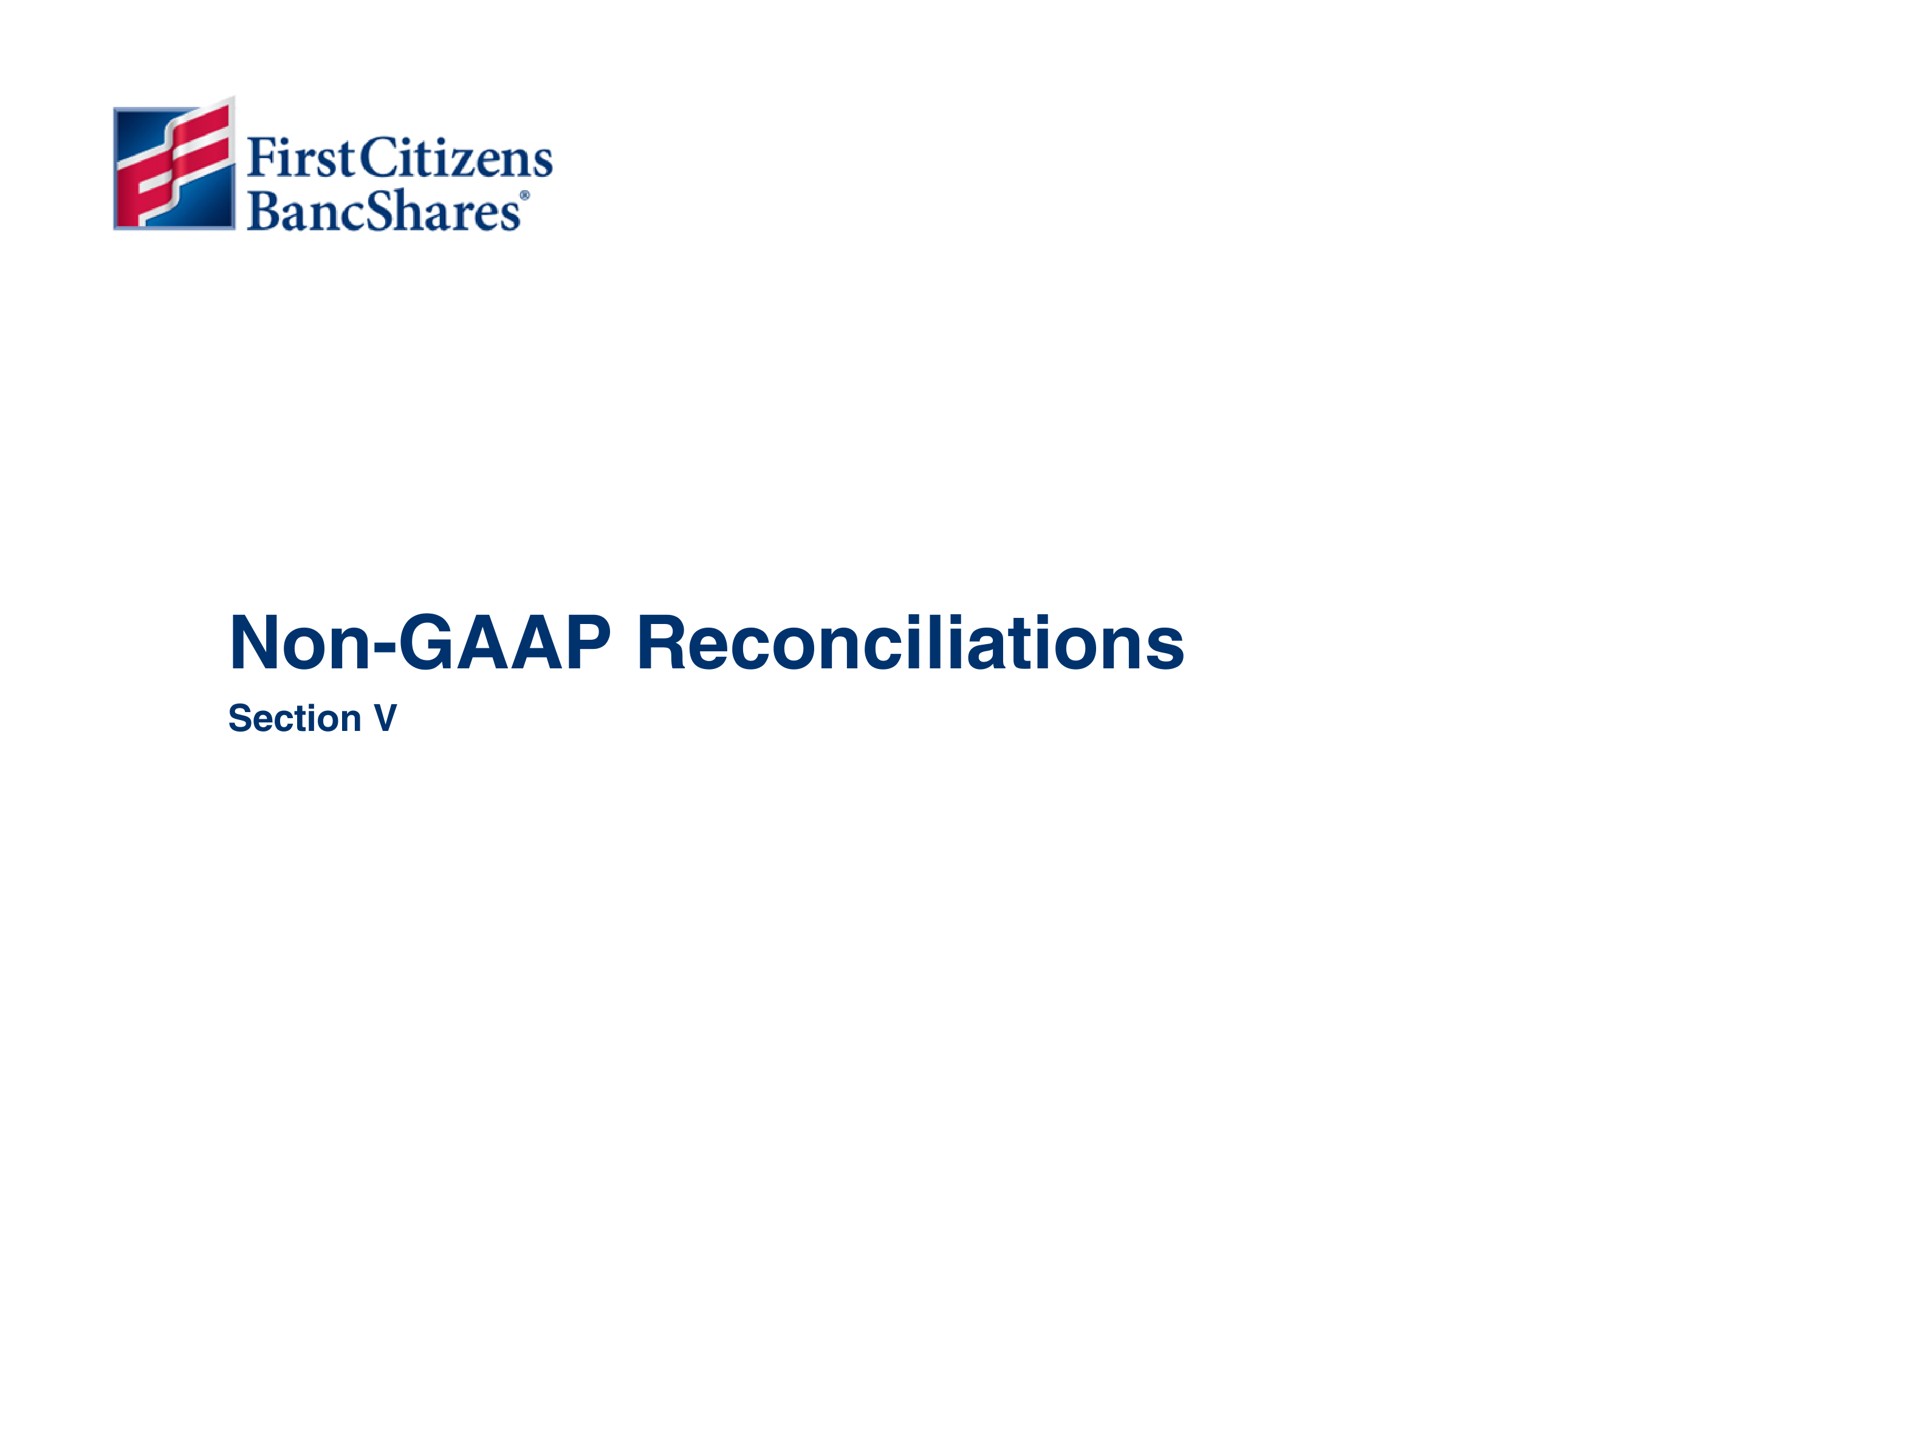 non reconciliations section first citizens | First Citizens BancShares